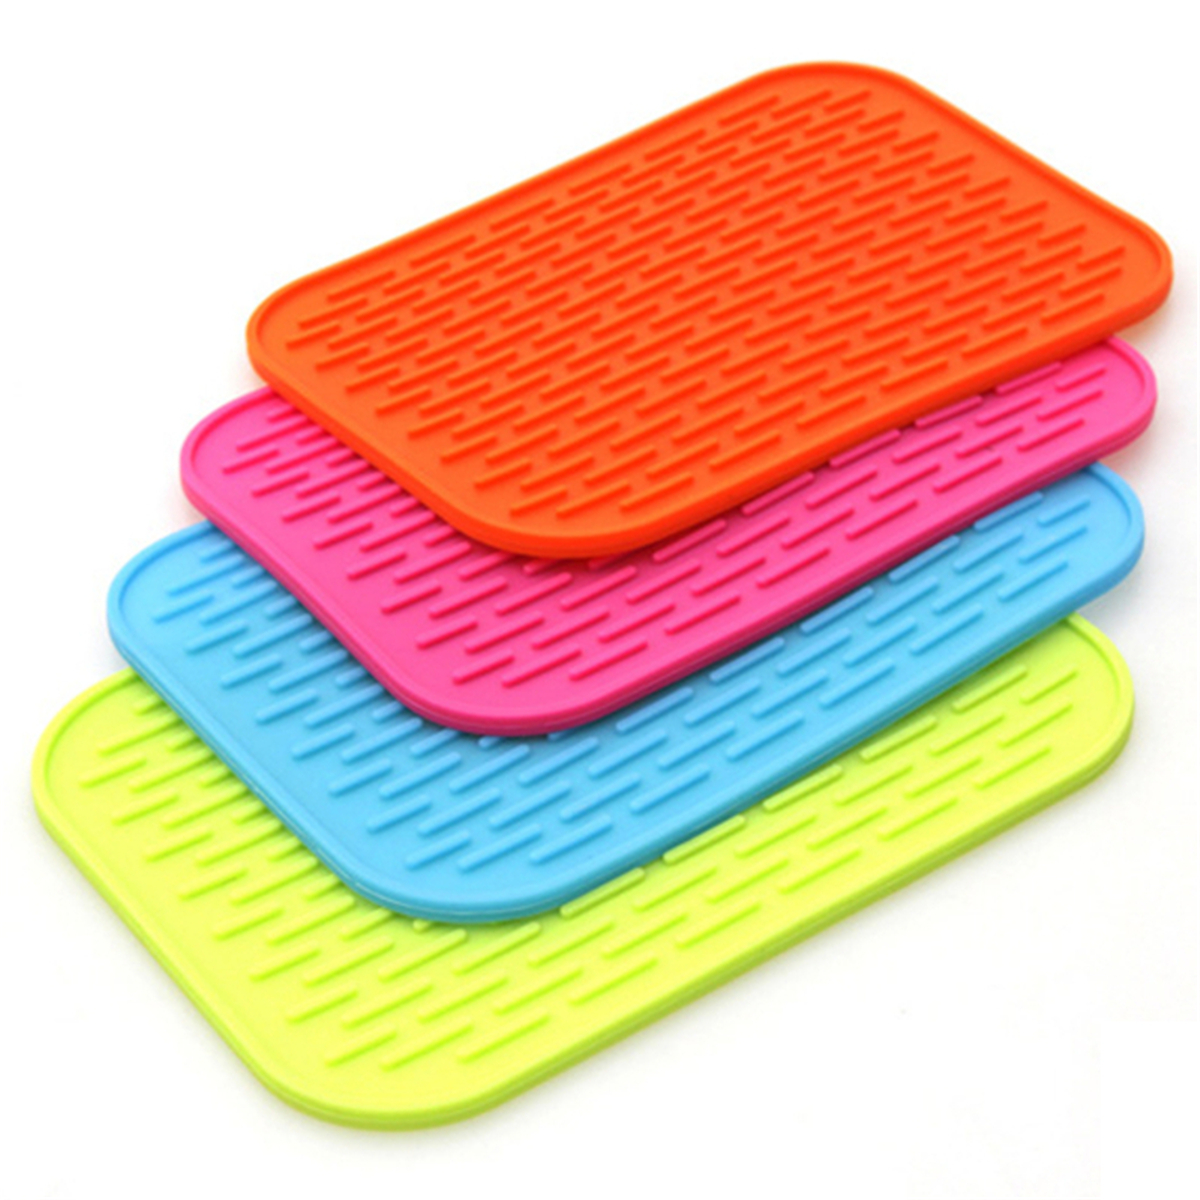 

Silicone Non-slip Mat Heat Resistant Table Placemat Kitchen Sink Dishes Cup Dry Coaster